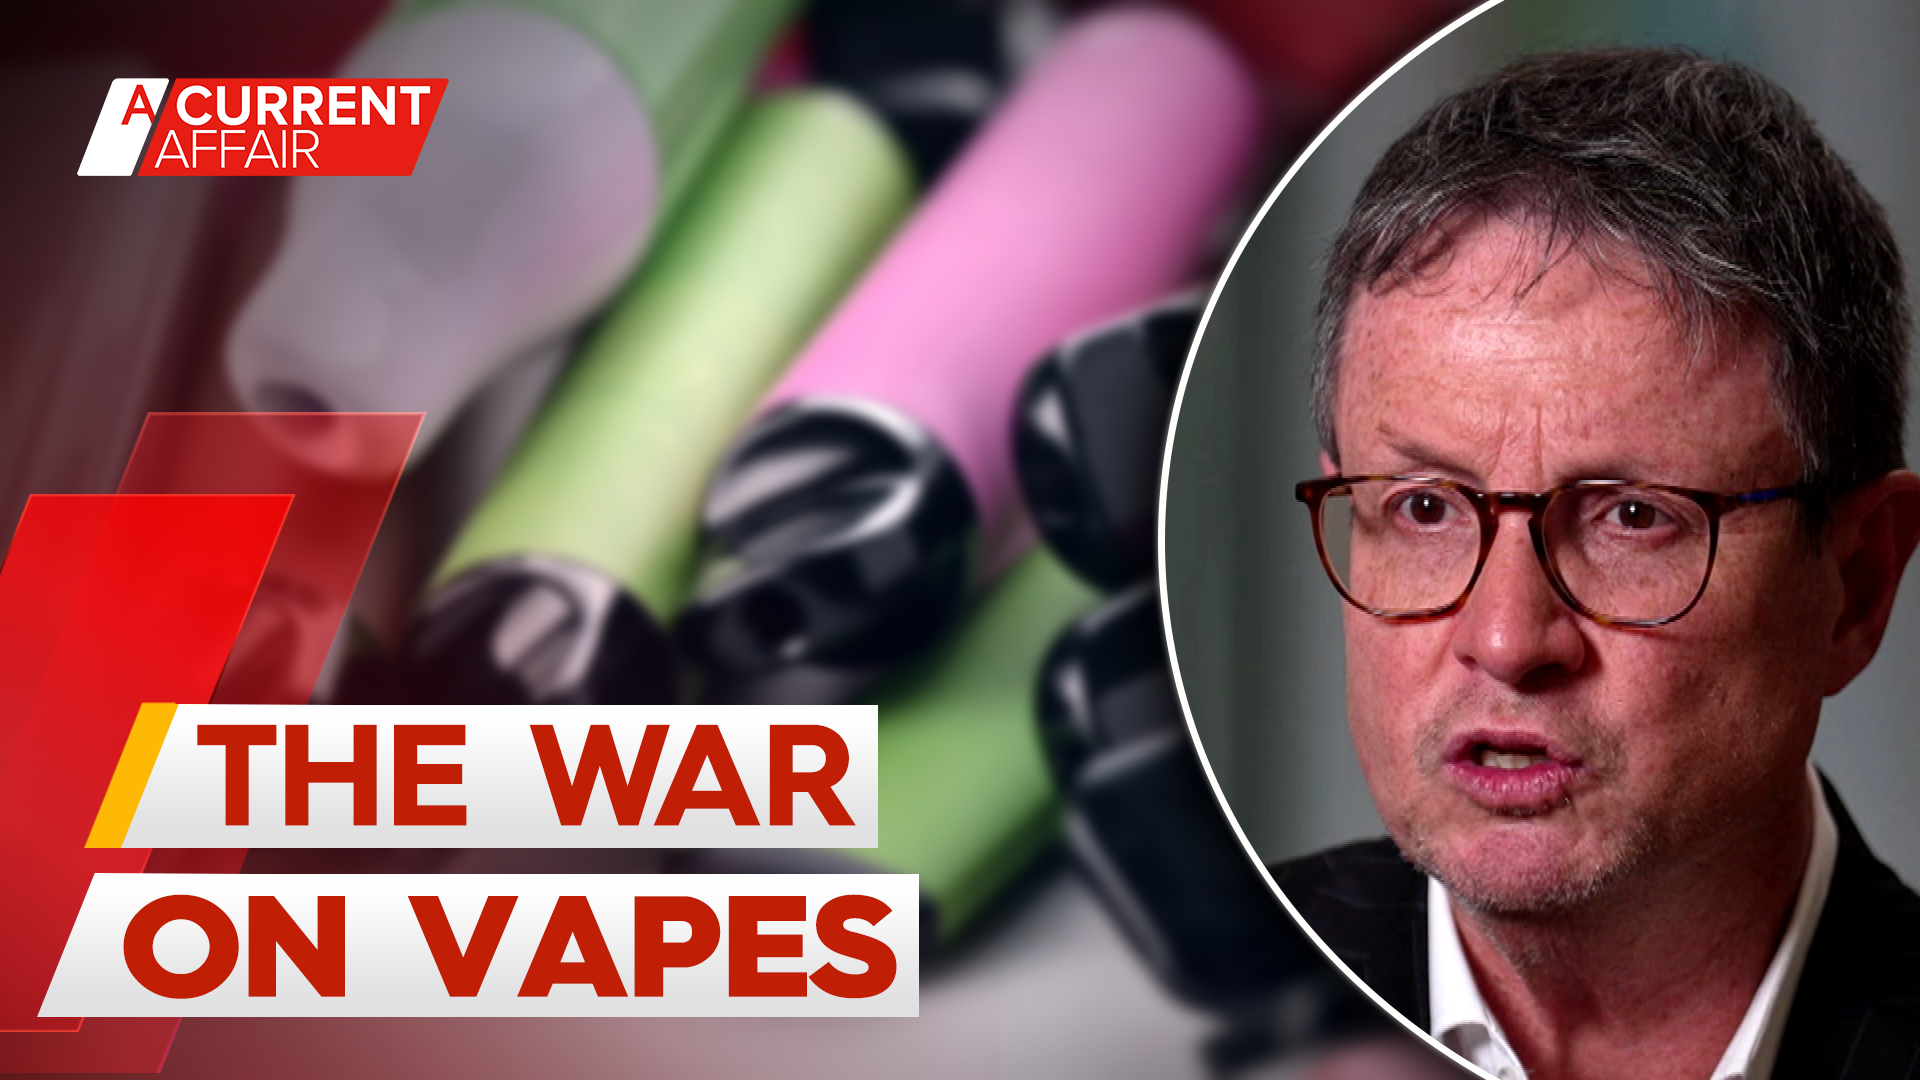 The controversial new vape laws dividing the industry